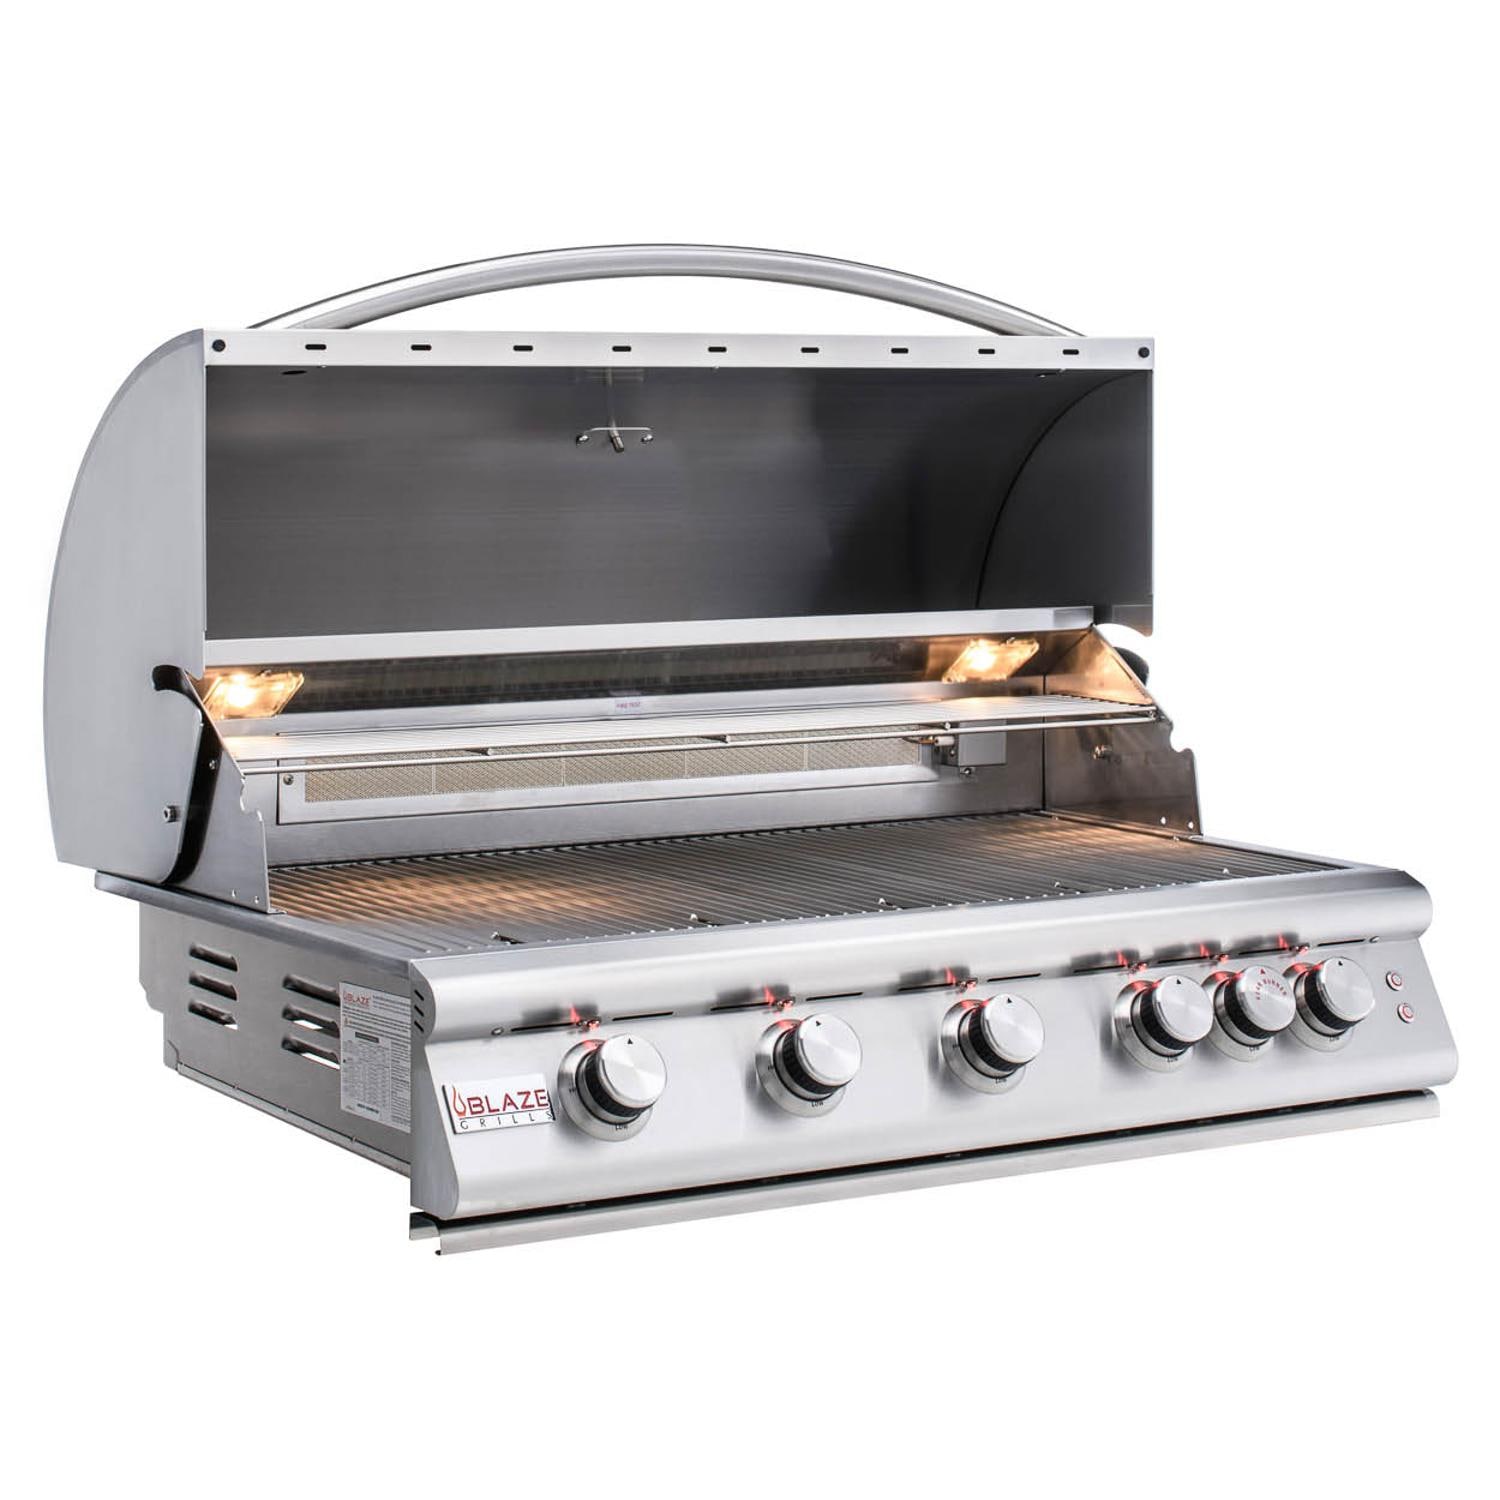 Outdoor Kitchen Professional Built-in BBQ Grill | 40" 5-Burner Natural Gas NG Grill W/ Rear Infrared Burner | Perfect For Outdoor Cooking & Entertaining By Blaze | Stainless Steel | BLZ-5LTE2-NG - image 1 of 6